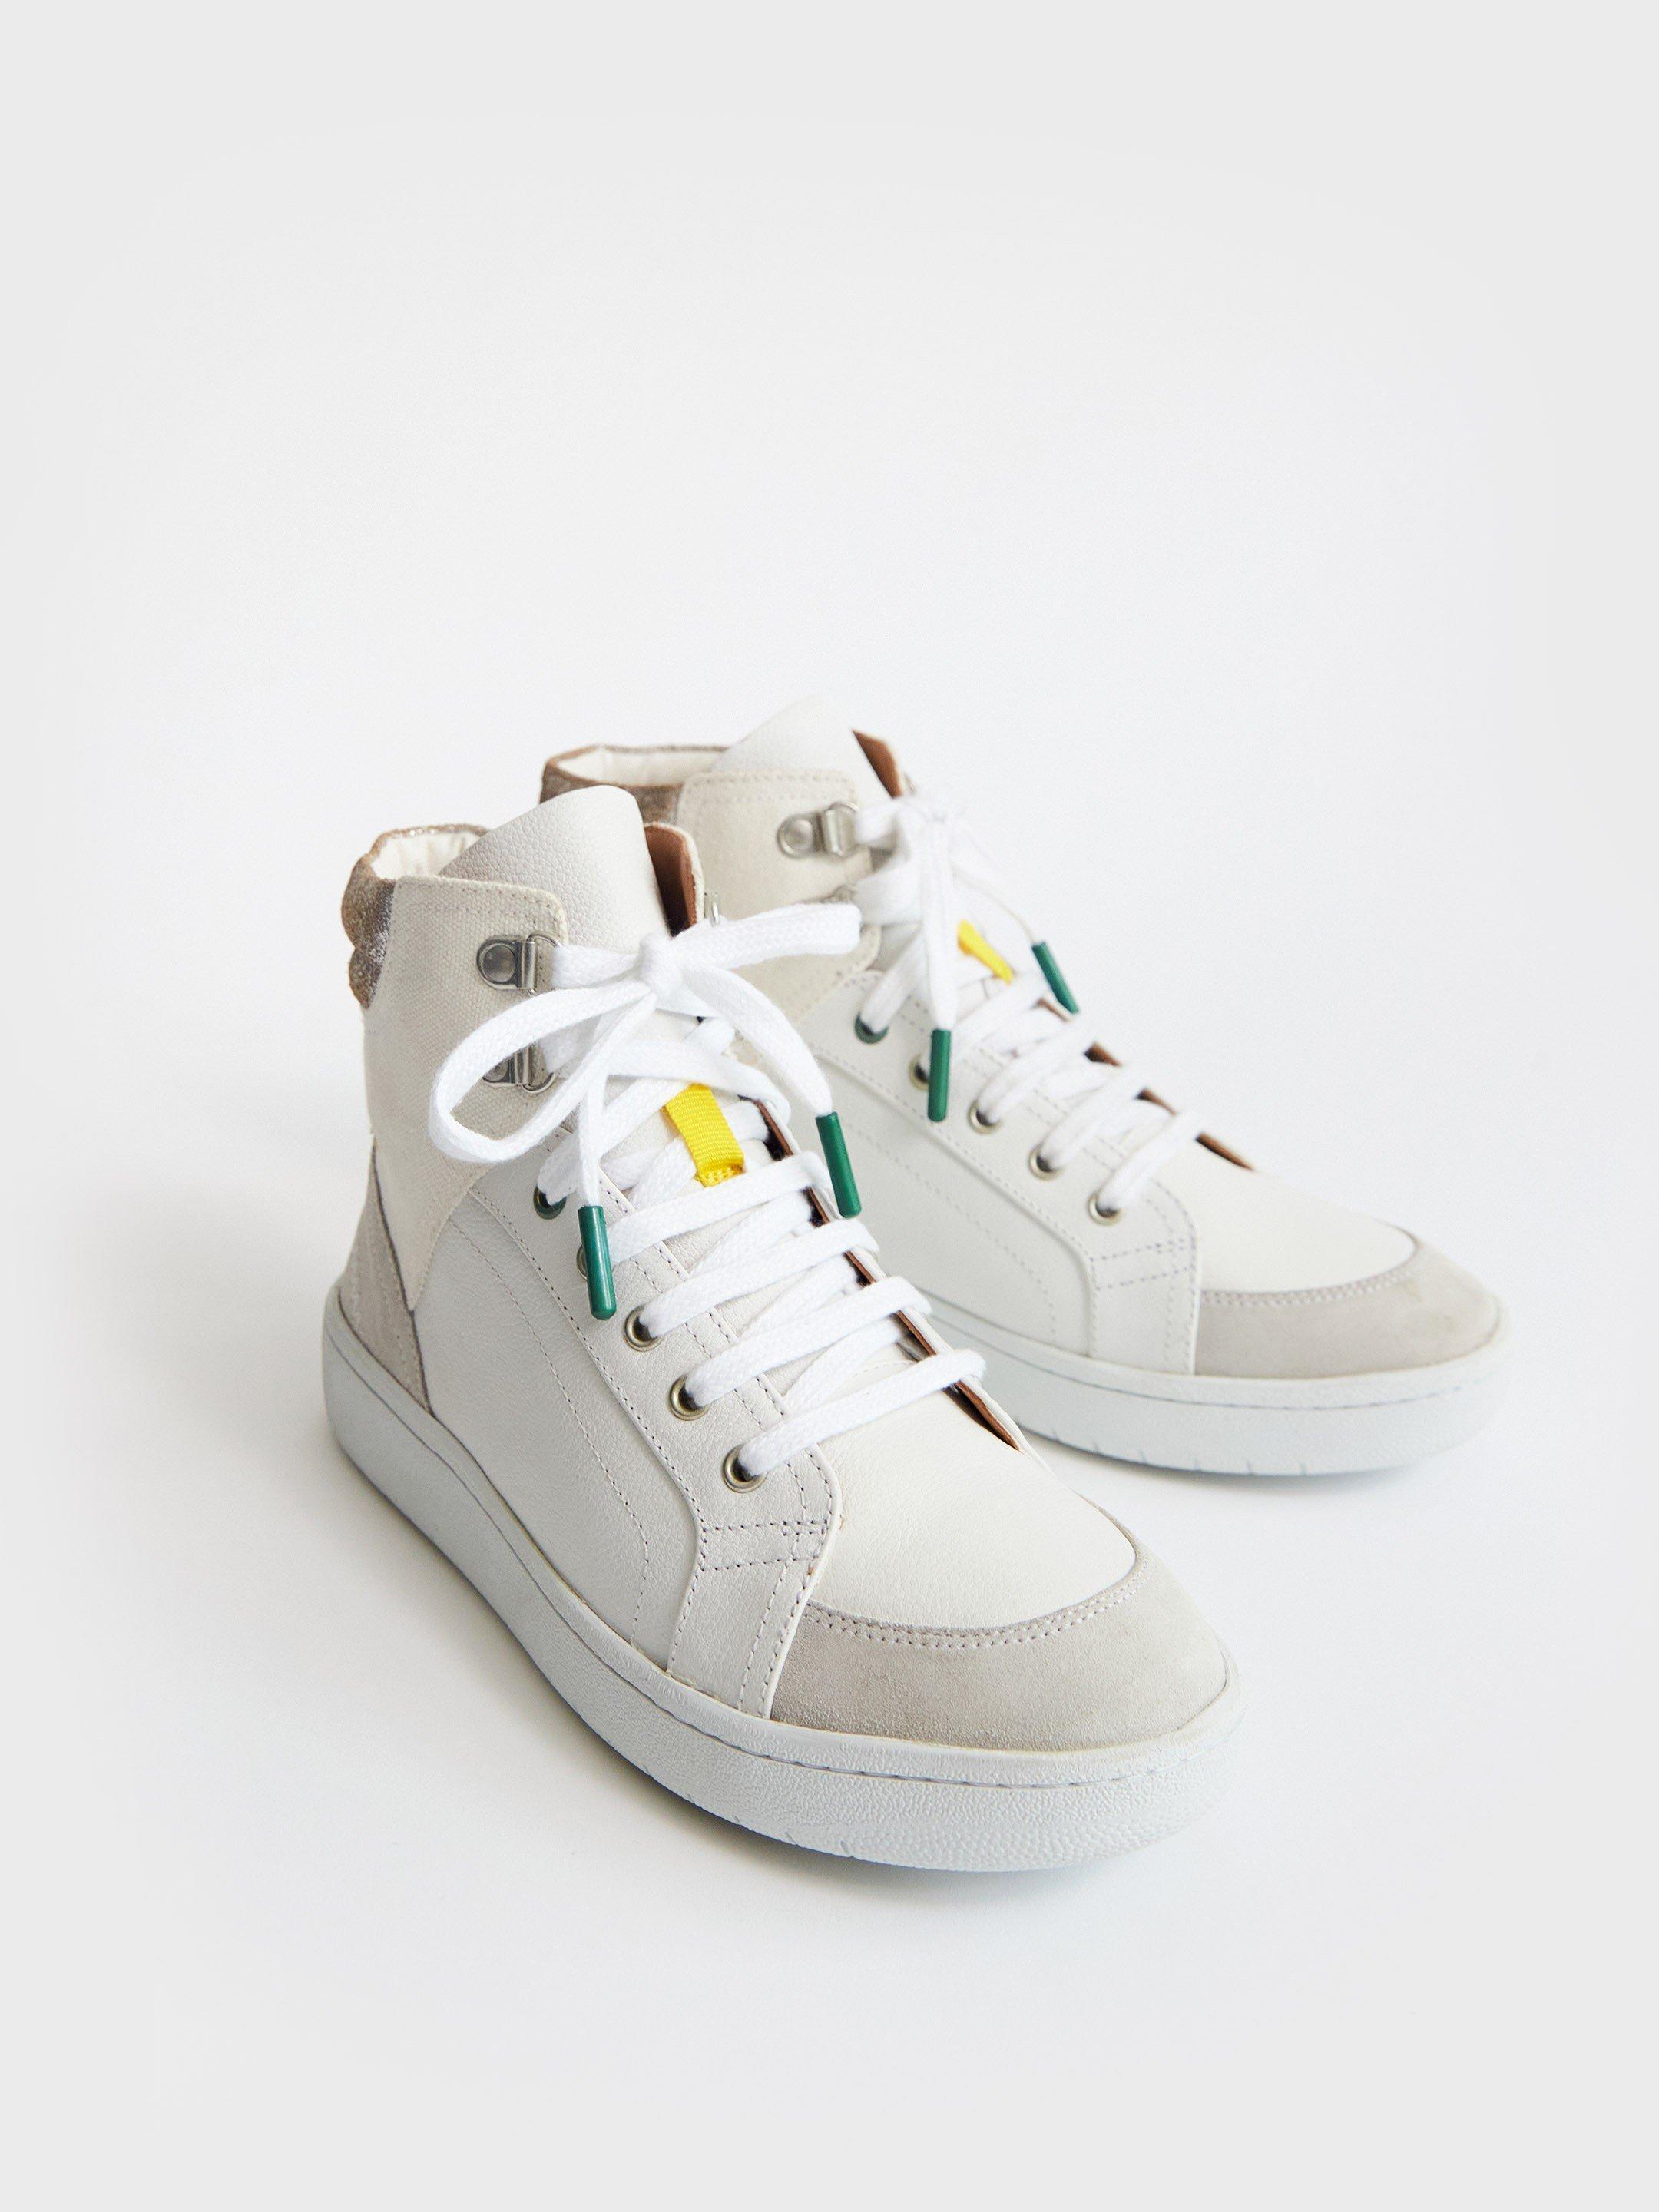 Leather Suede High Top Trainer in WHITE MLT - FLAT FRONT